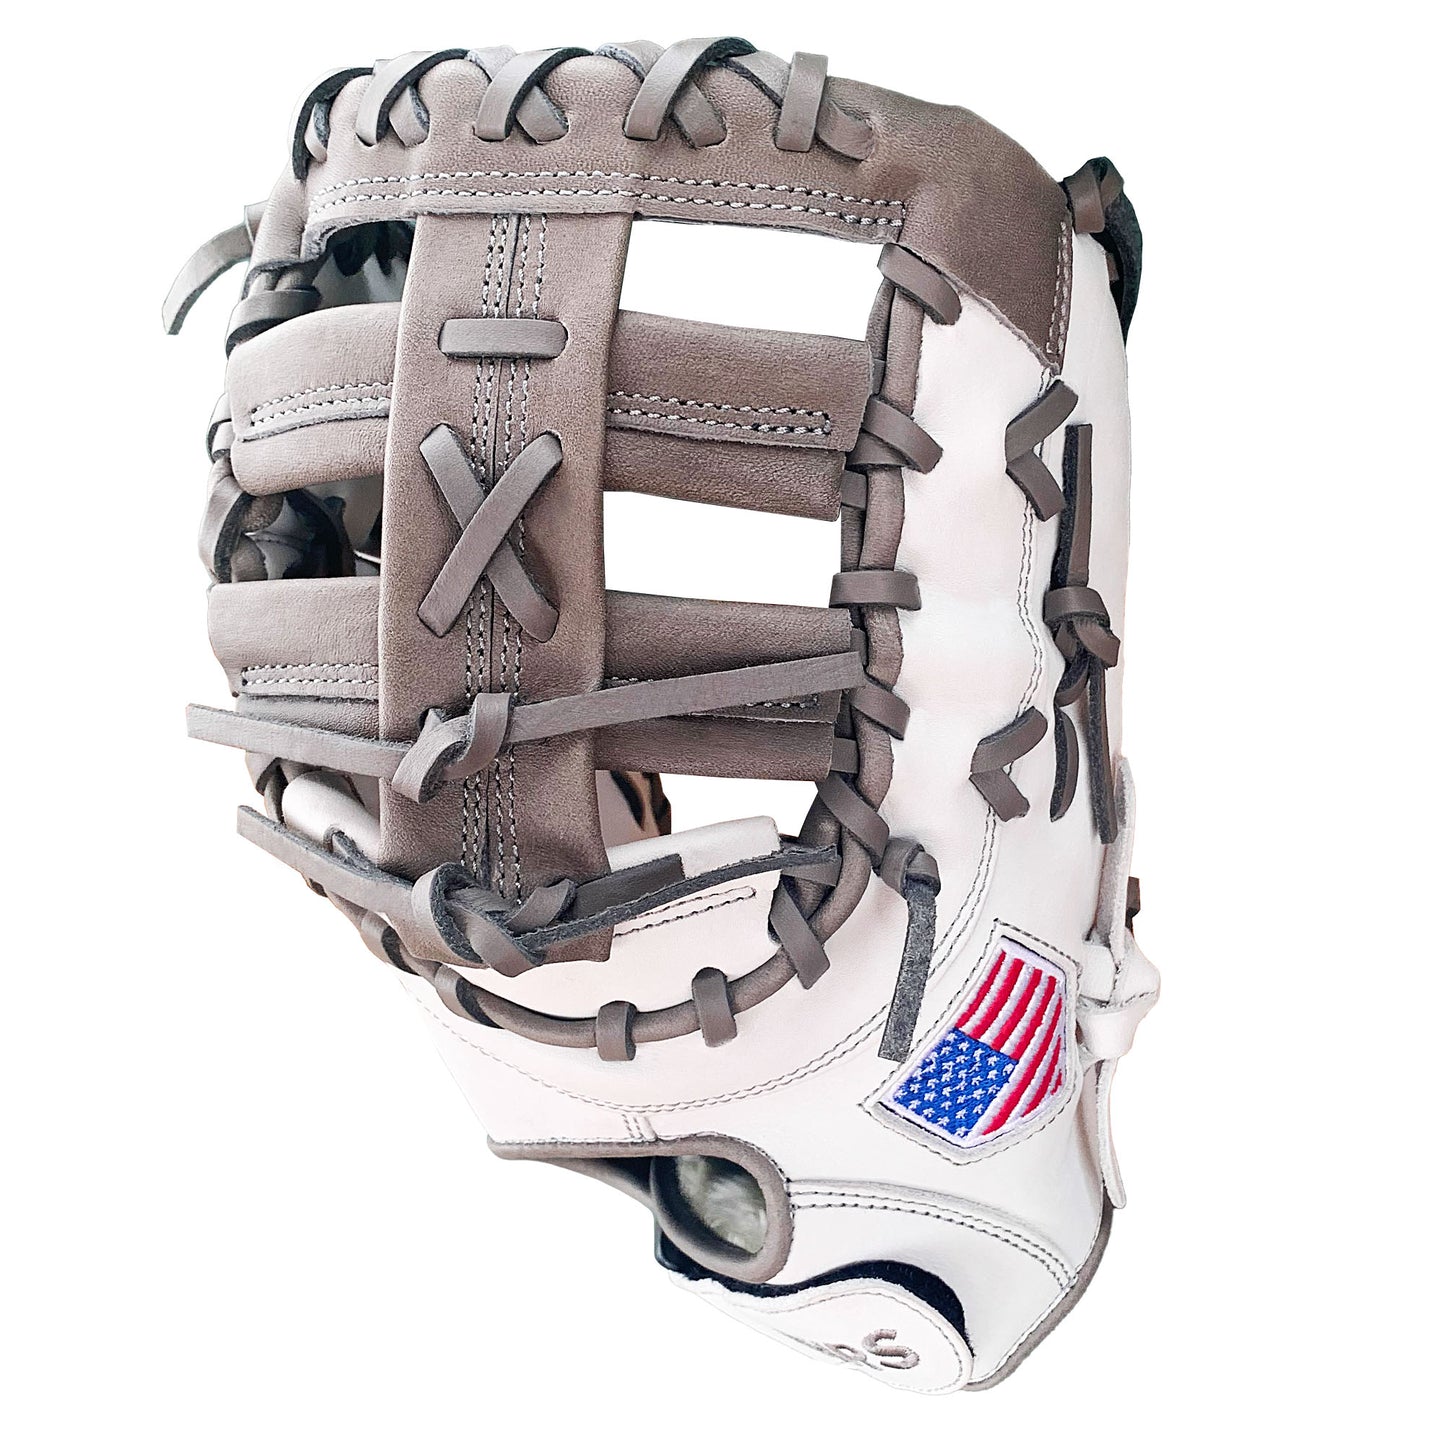 13" Softball First Base Mitt - White with Gray Laces